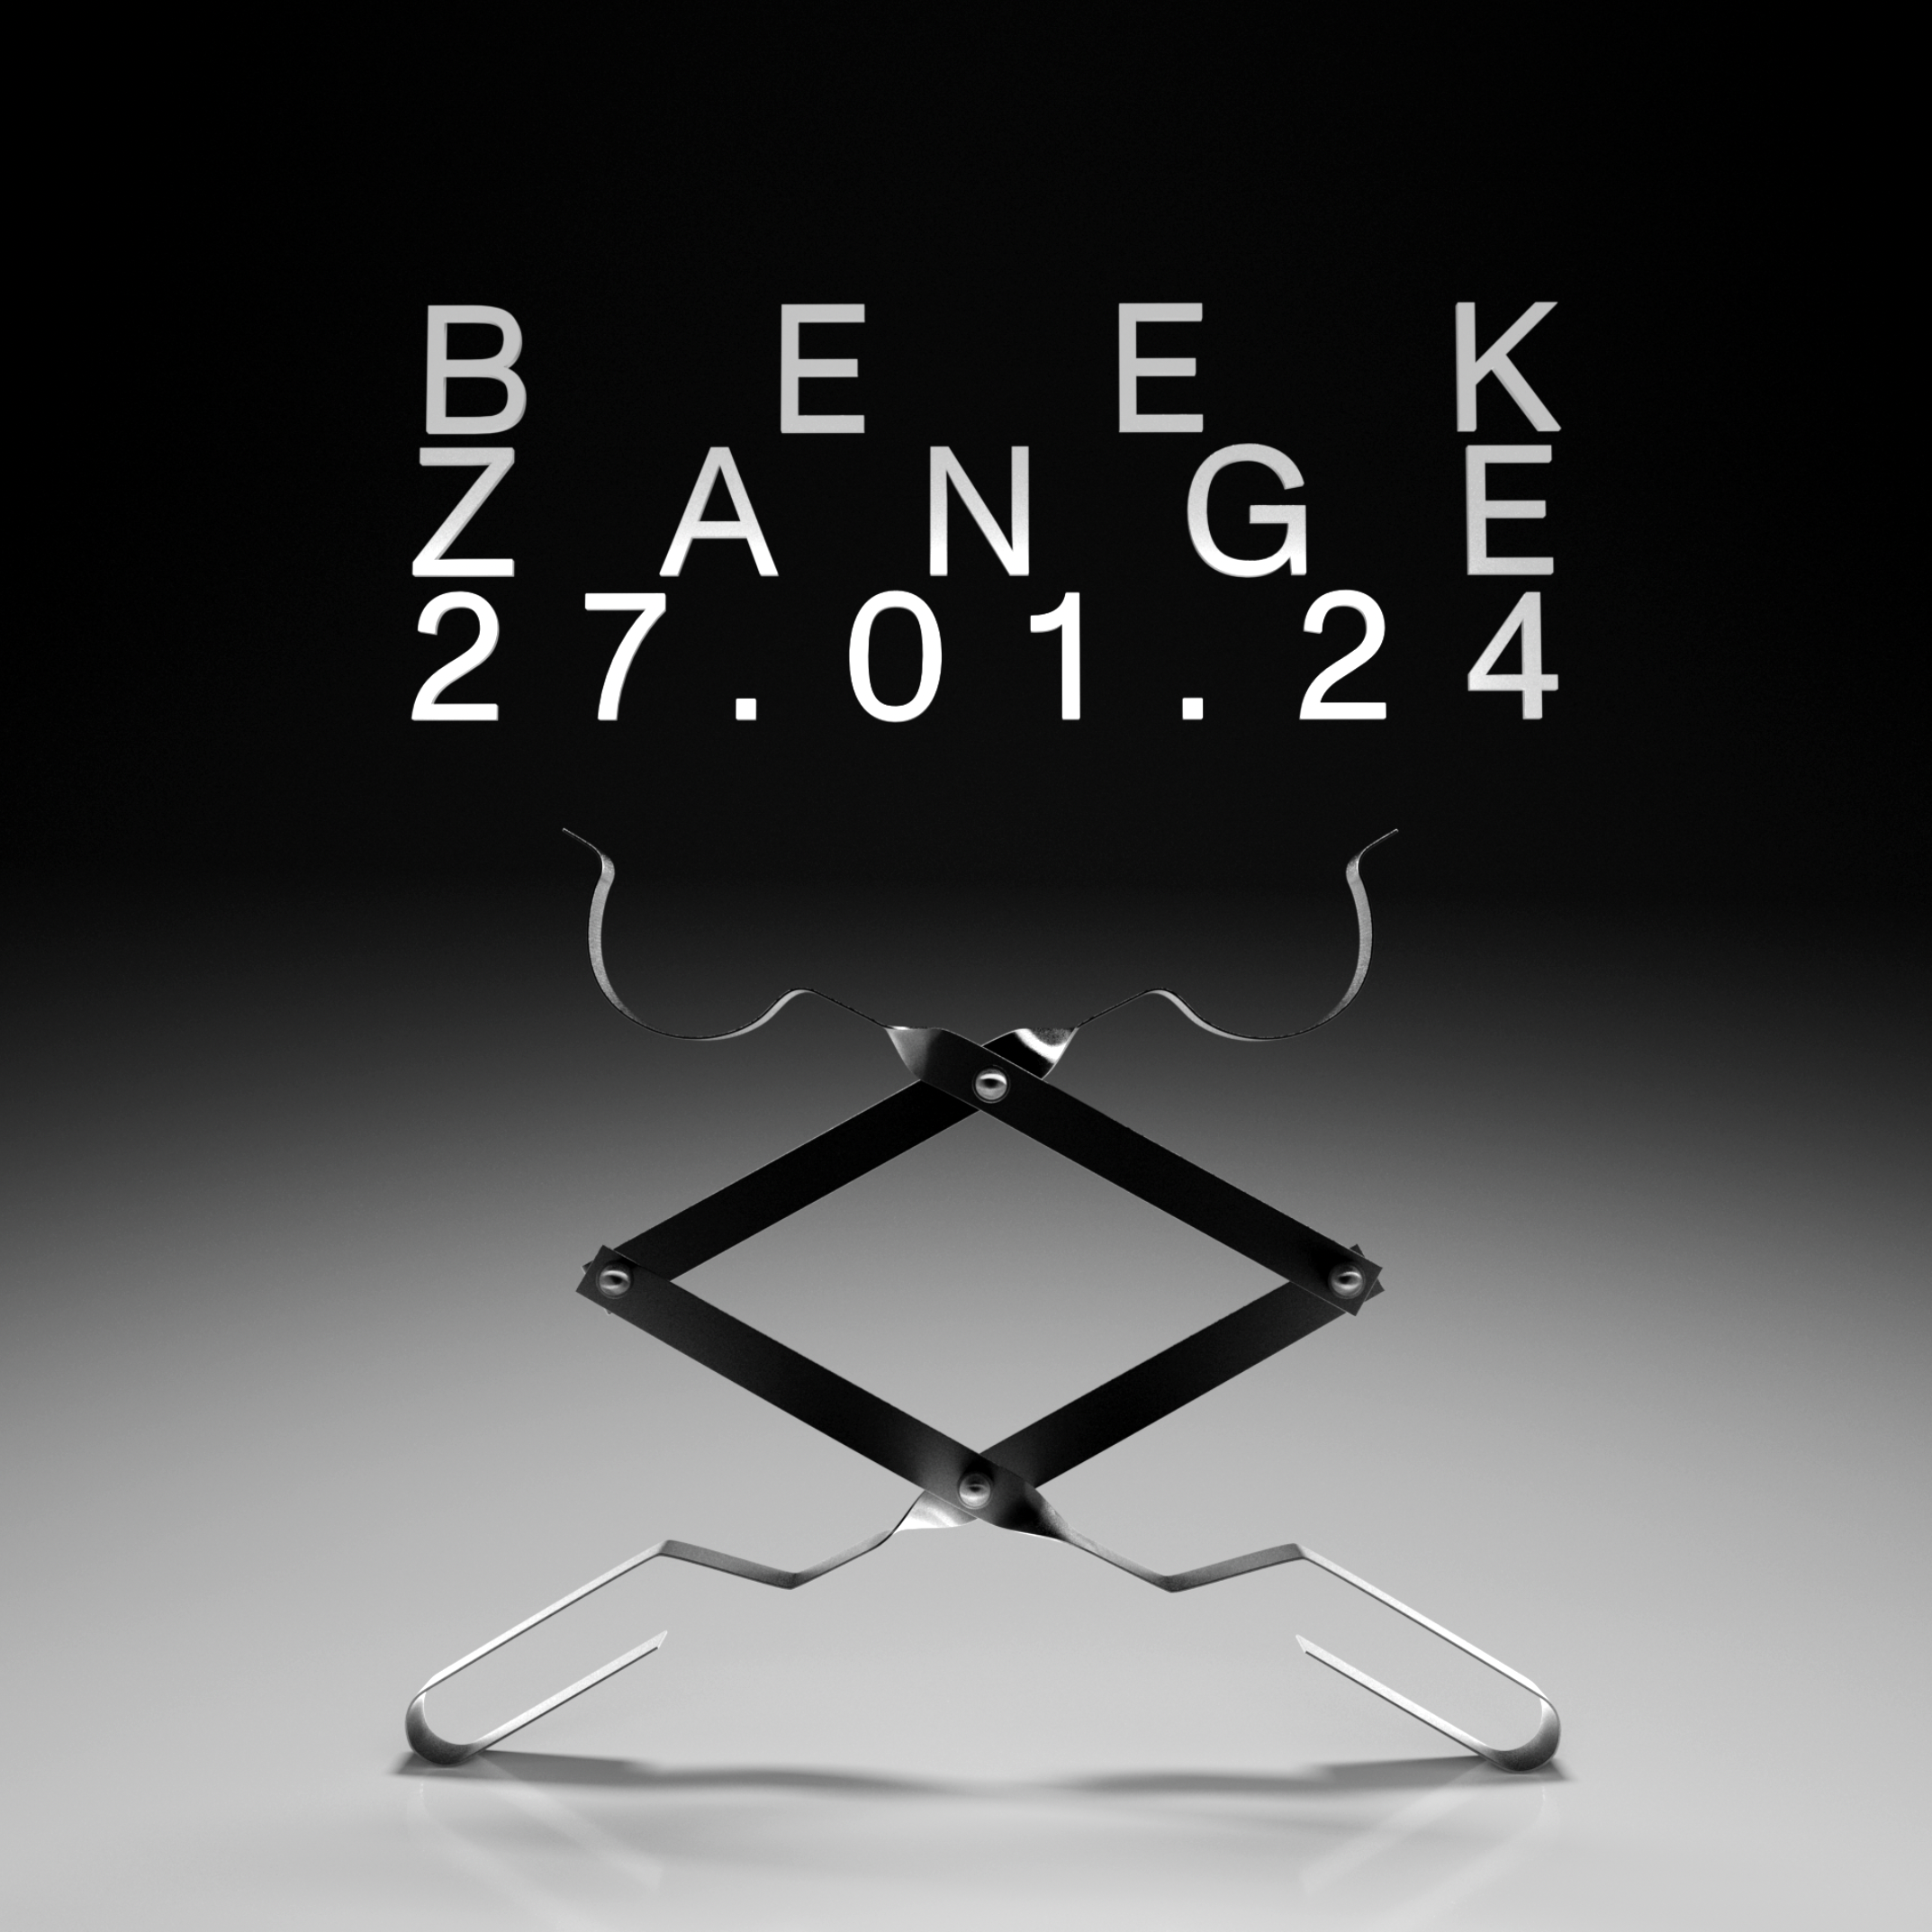 ZANGE X Beek with bdstf, Cassius Select - フライヤー裏